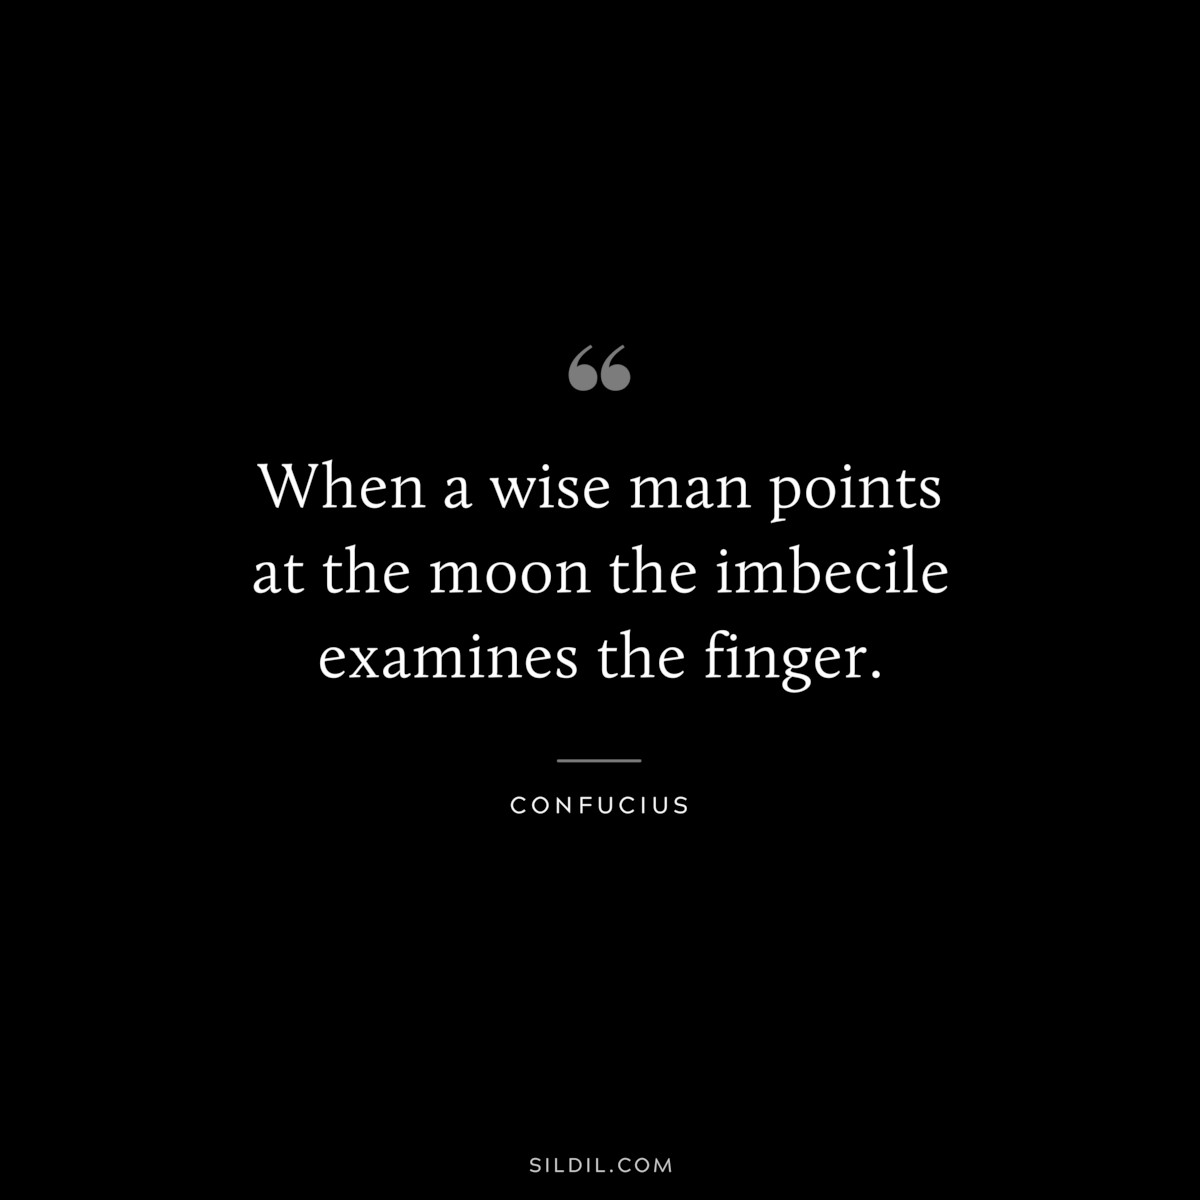 When a wise man points at the moon the imbecile examines the finger. ― Confucius